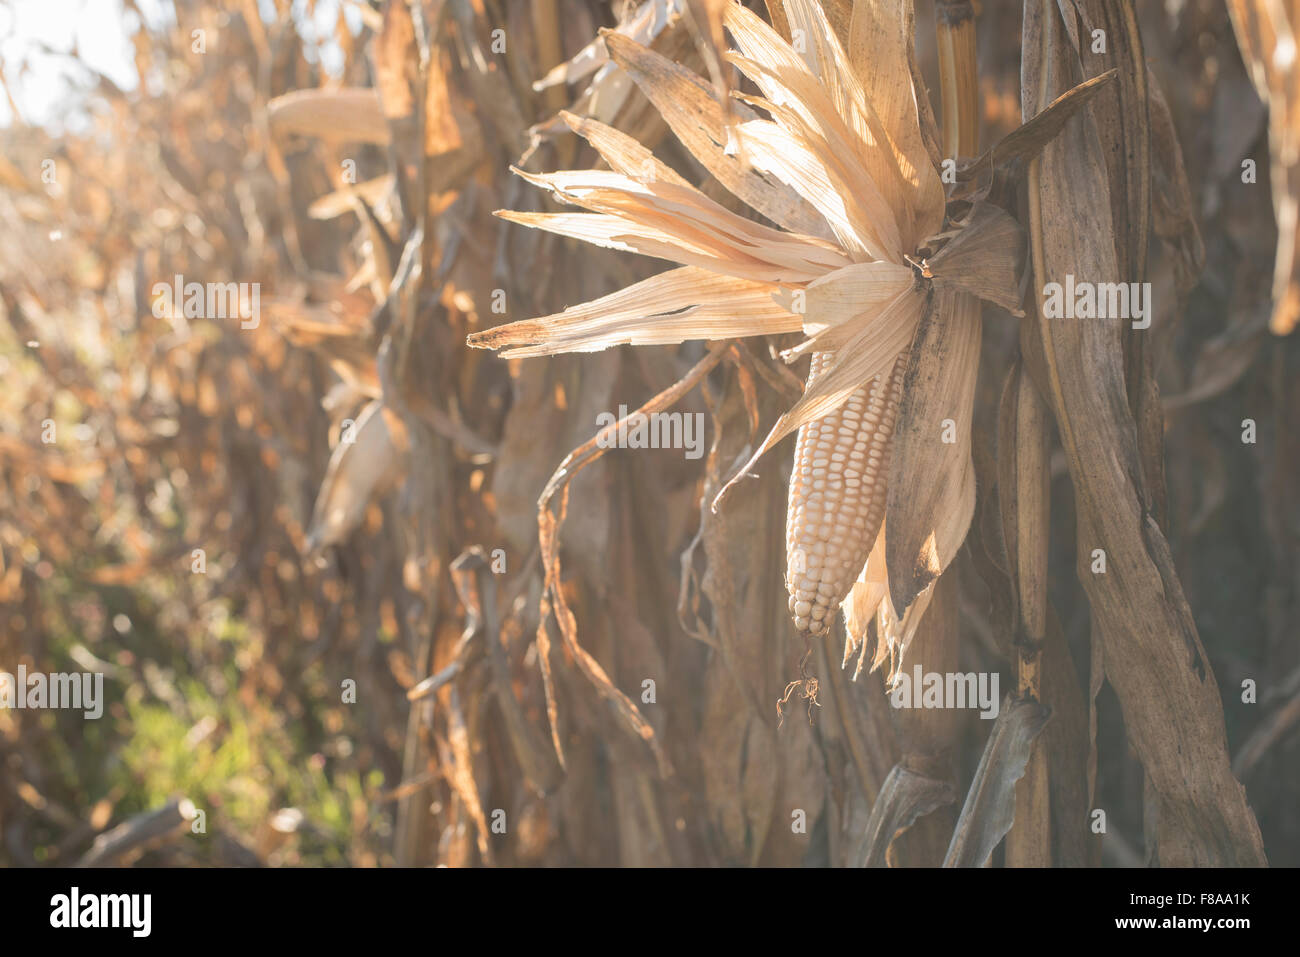 Late harvest of a maize field in Mexico at dusk Stock Photo